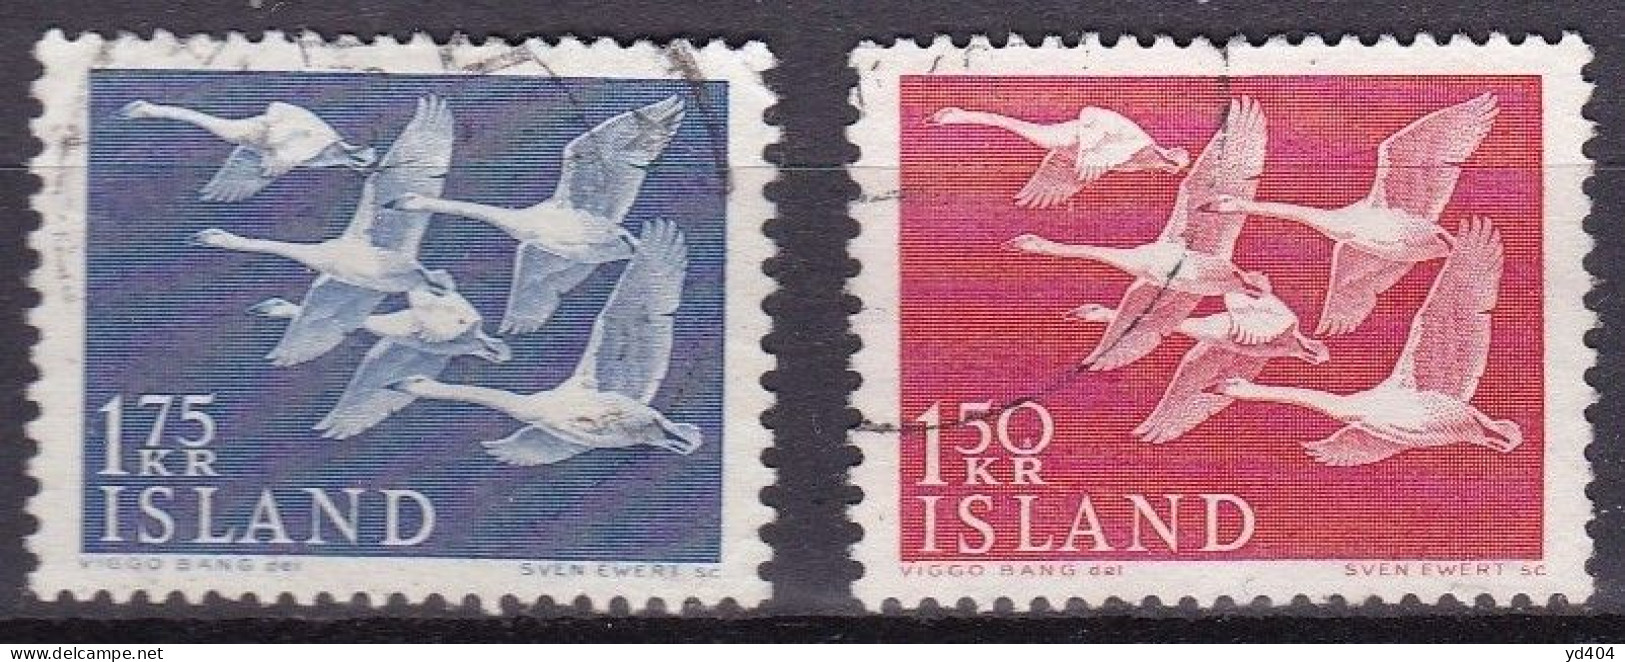 IS061 – ISLANDE – ICELAND – 1956 – NORTHEN COUNTRIES ISSUE – Y&T # 270/1 USED 15 € - Oblitérés